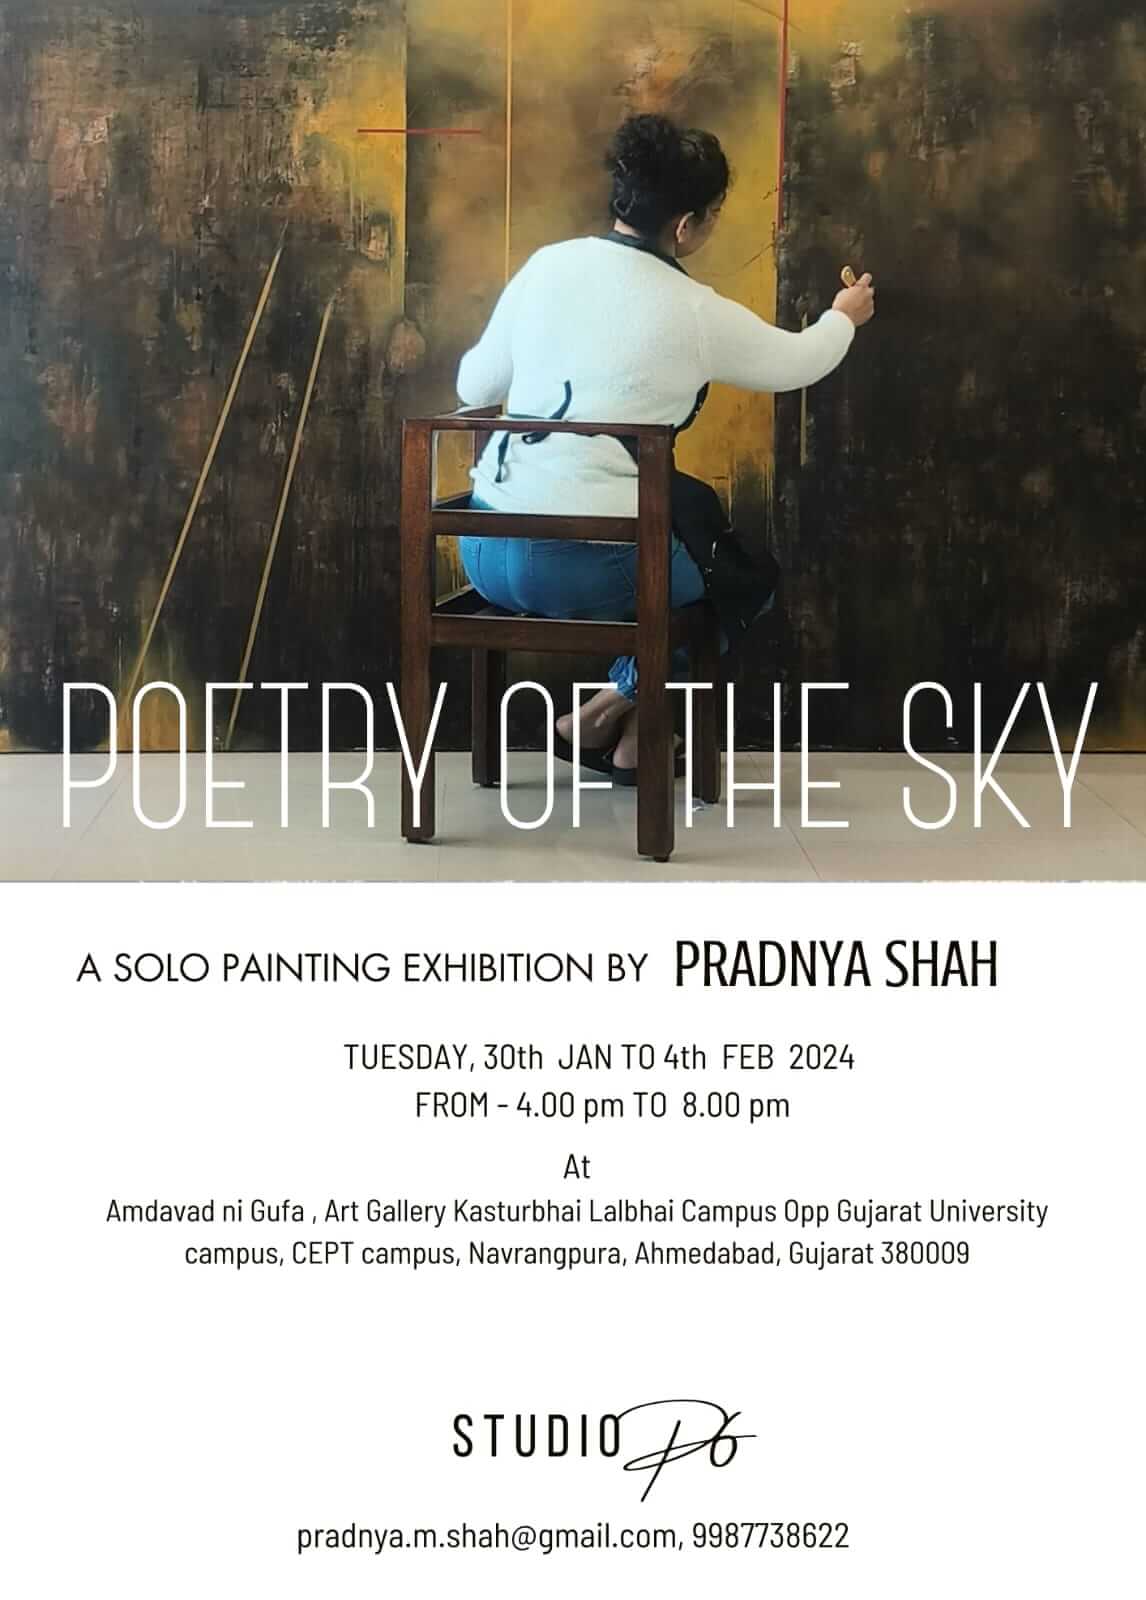 Poetry of the Sky - A solo painting exhibition by Pradnya Shah